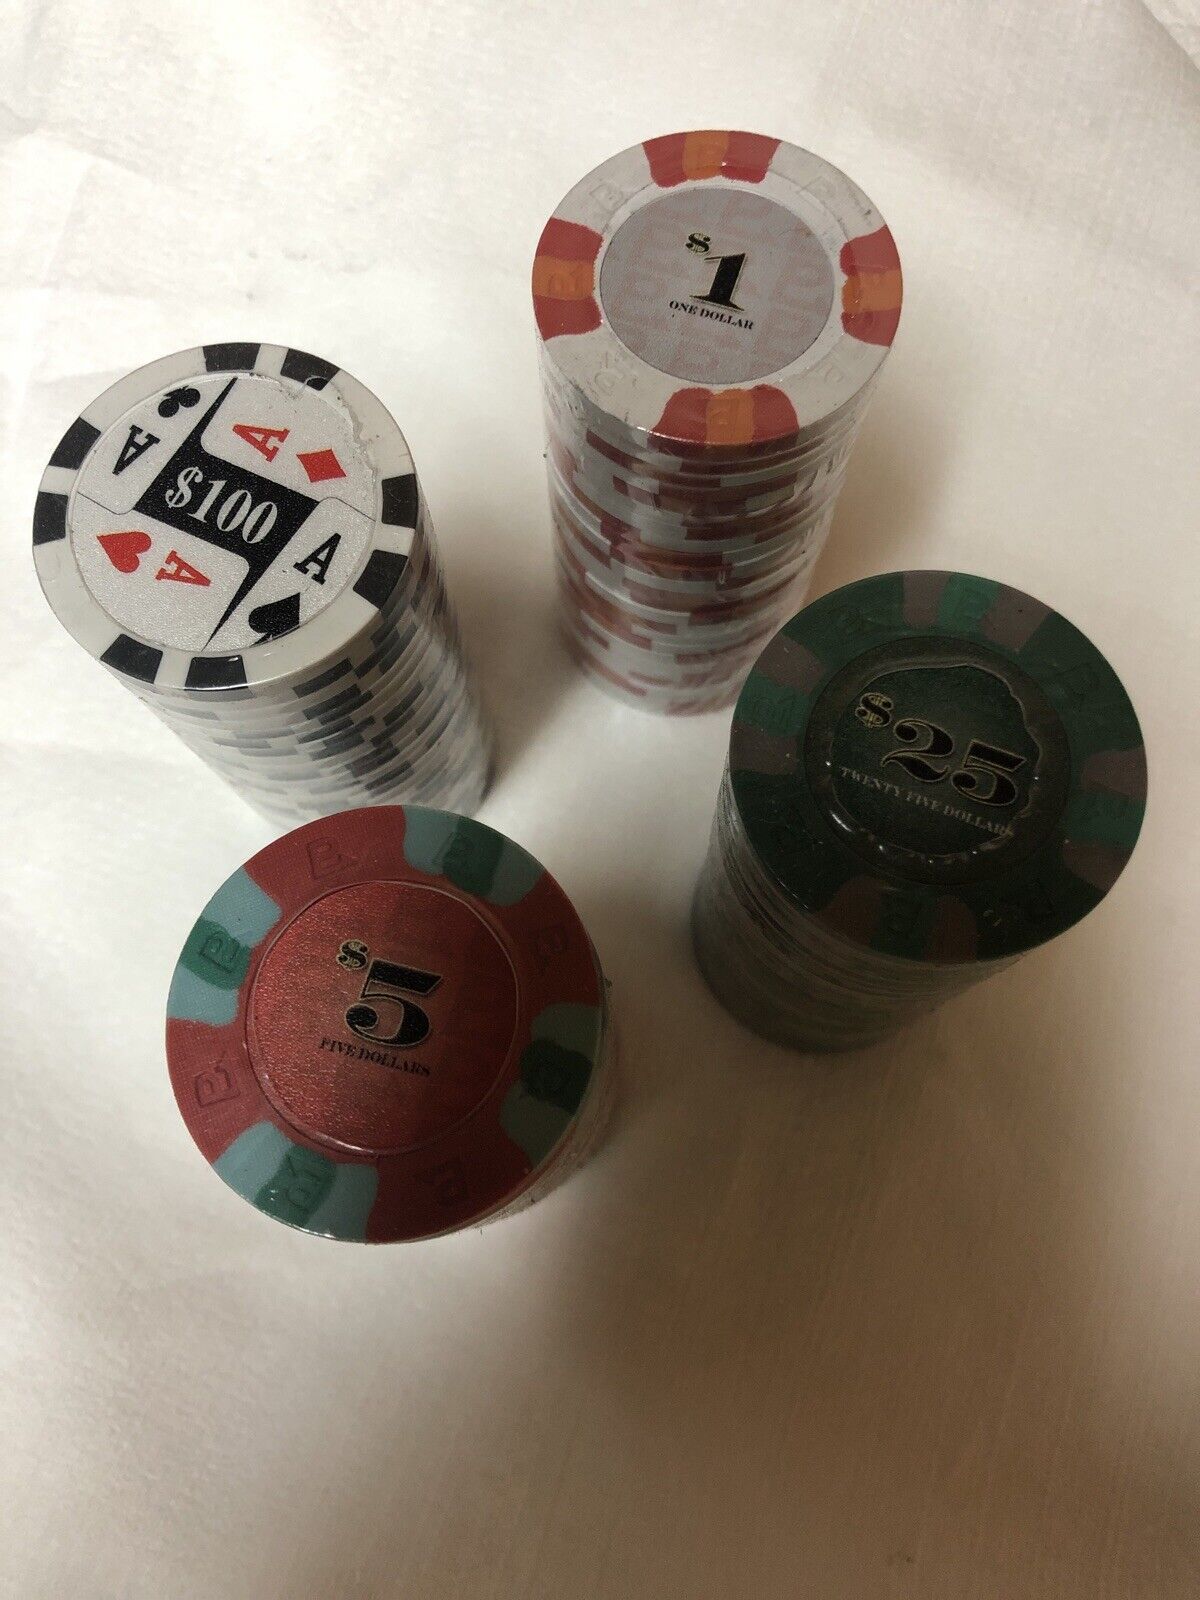 100pc High Quality Poker Chips $1, $5, $25, $100 (25pc Each) New